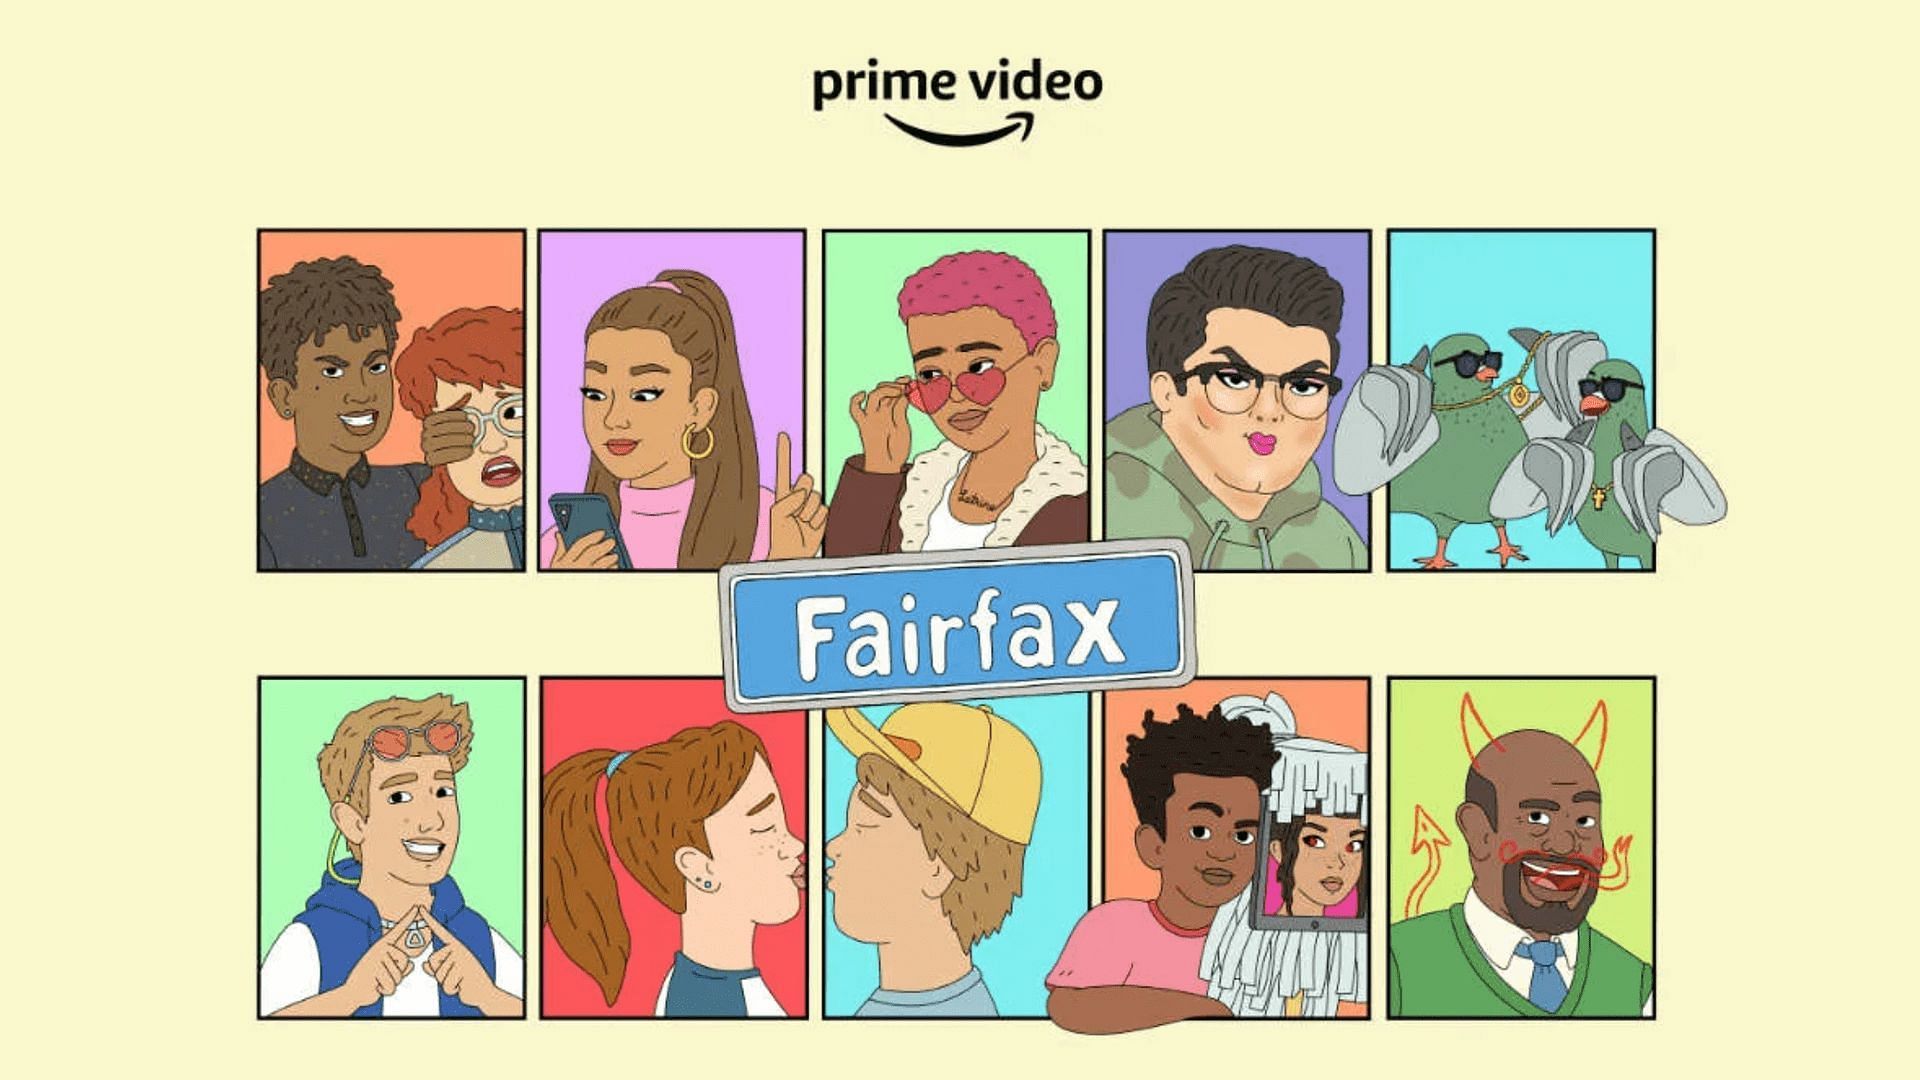 Prime Video&#039;s official poster for Fairfax Season 2 (Prime Video)